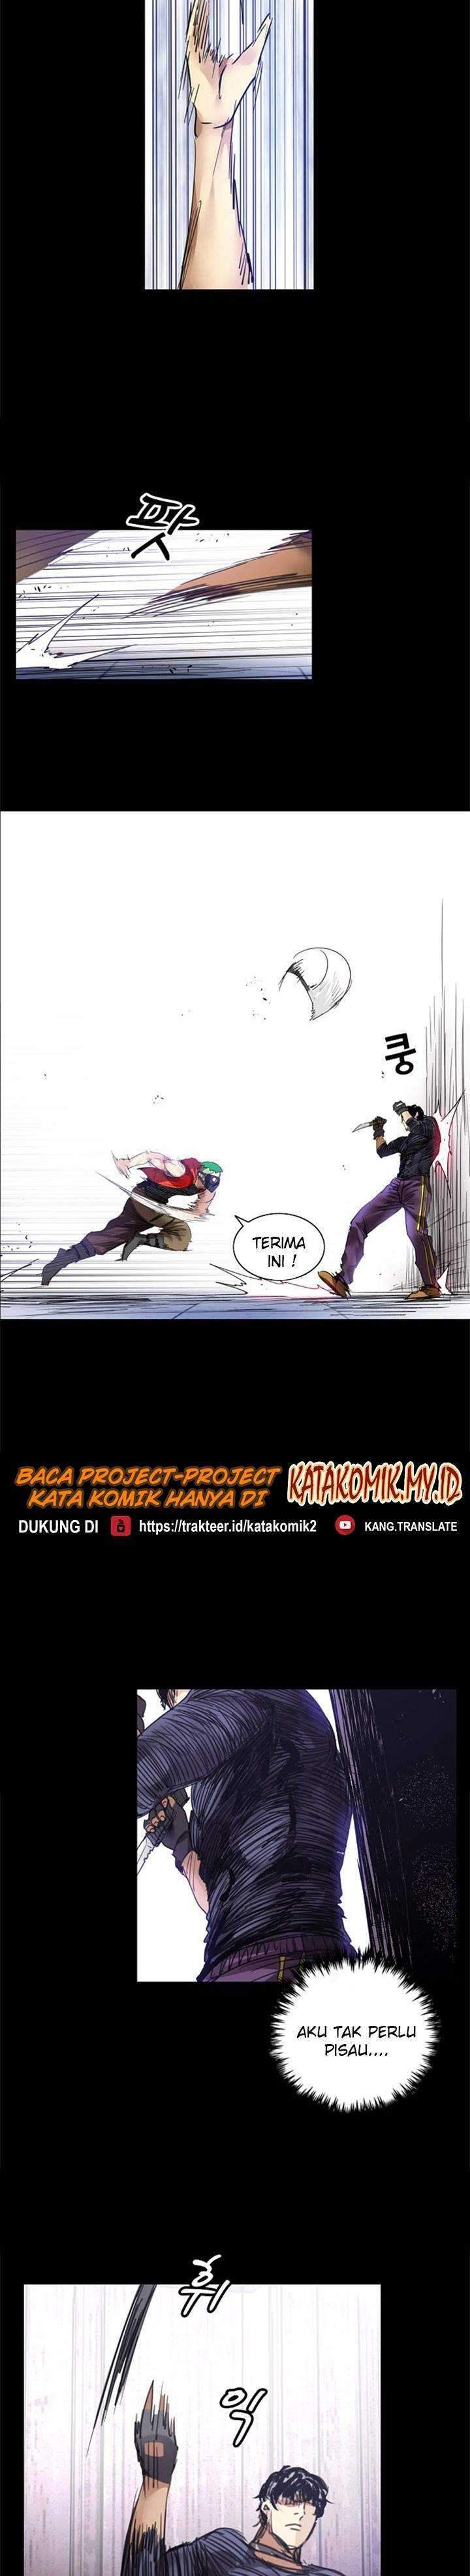 Fighters Chapter 44